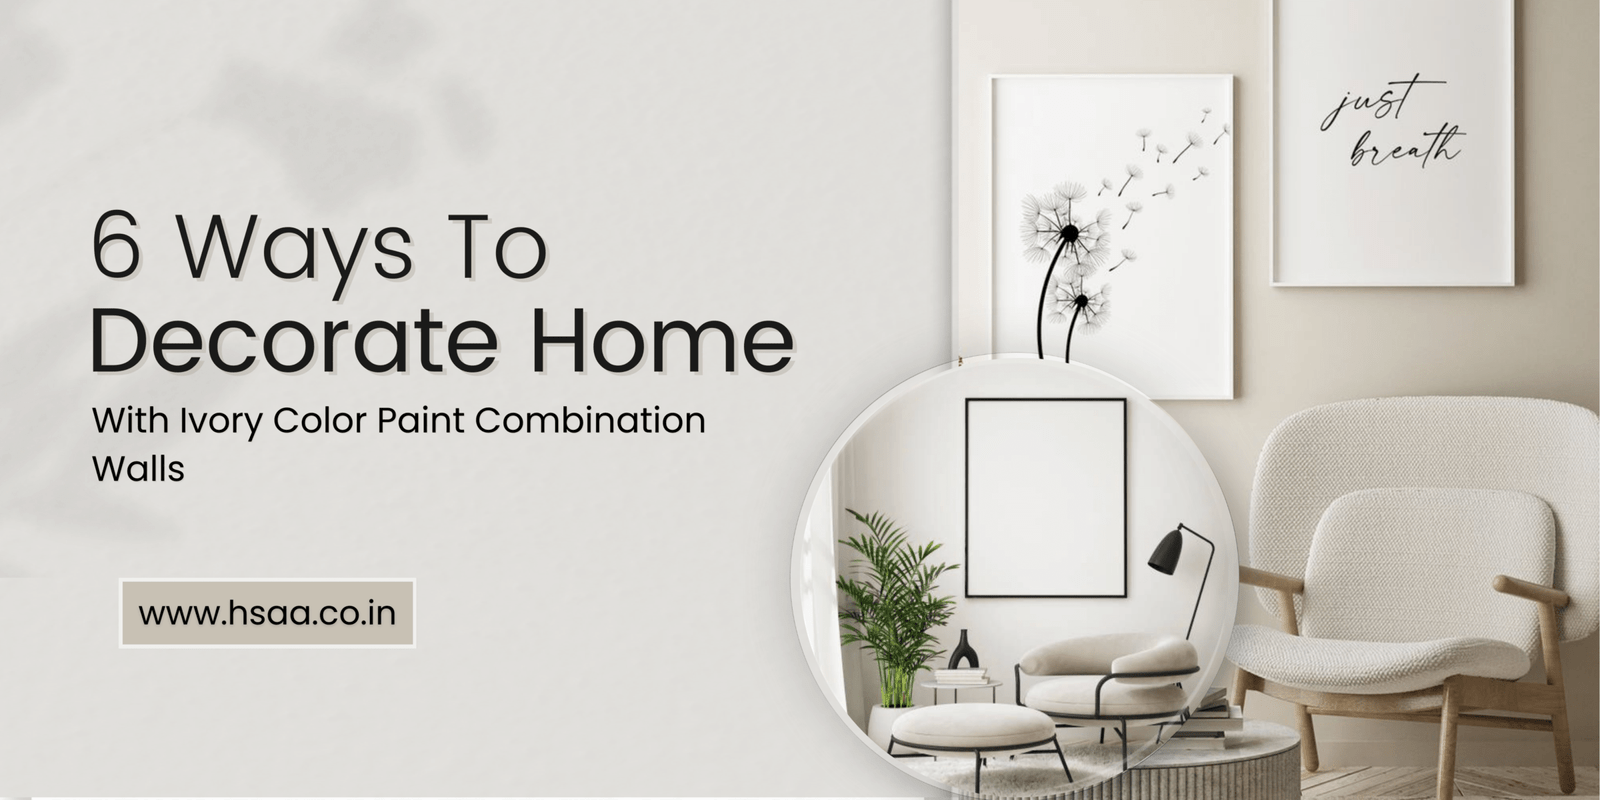 decorate home with ivory color paint combination walls